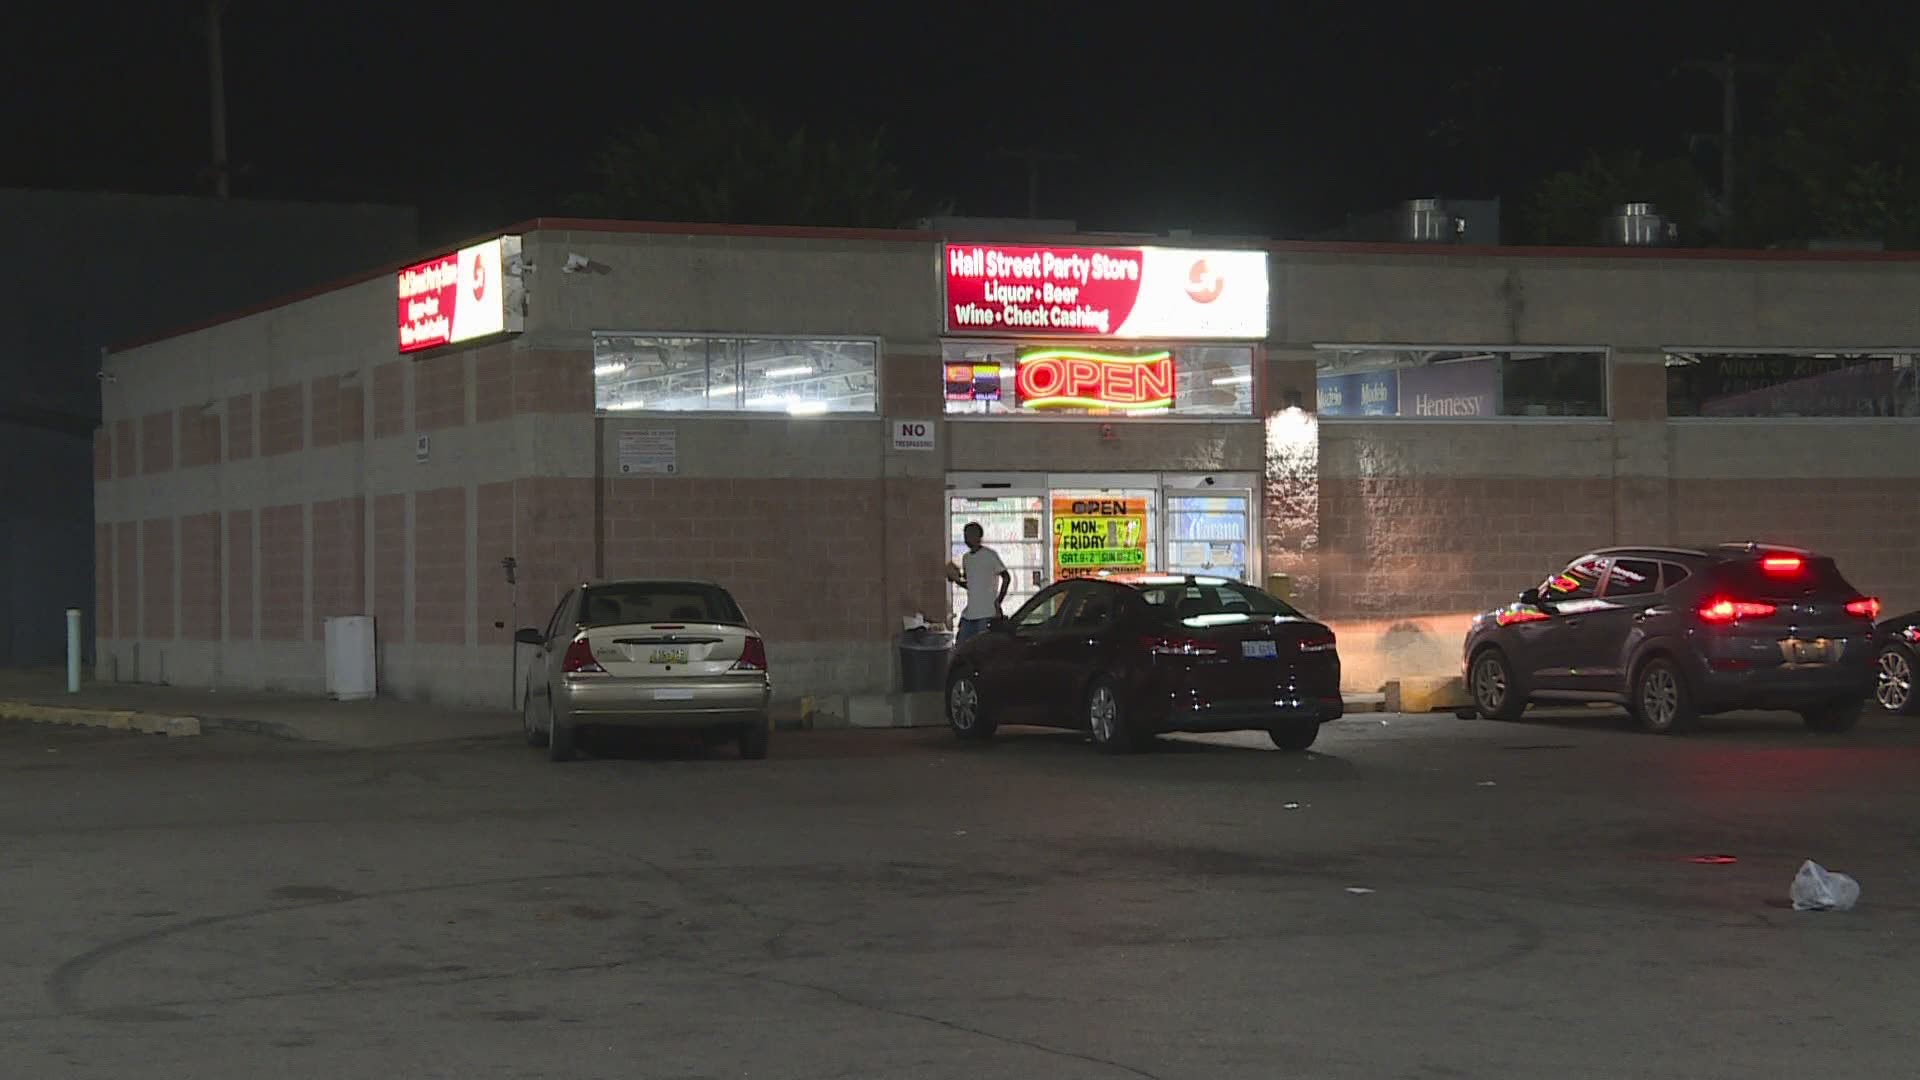 Grand Rapids Police Department is investigating after a woman was shot in a party story parking lot Thursday night.